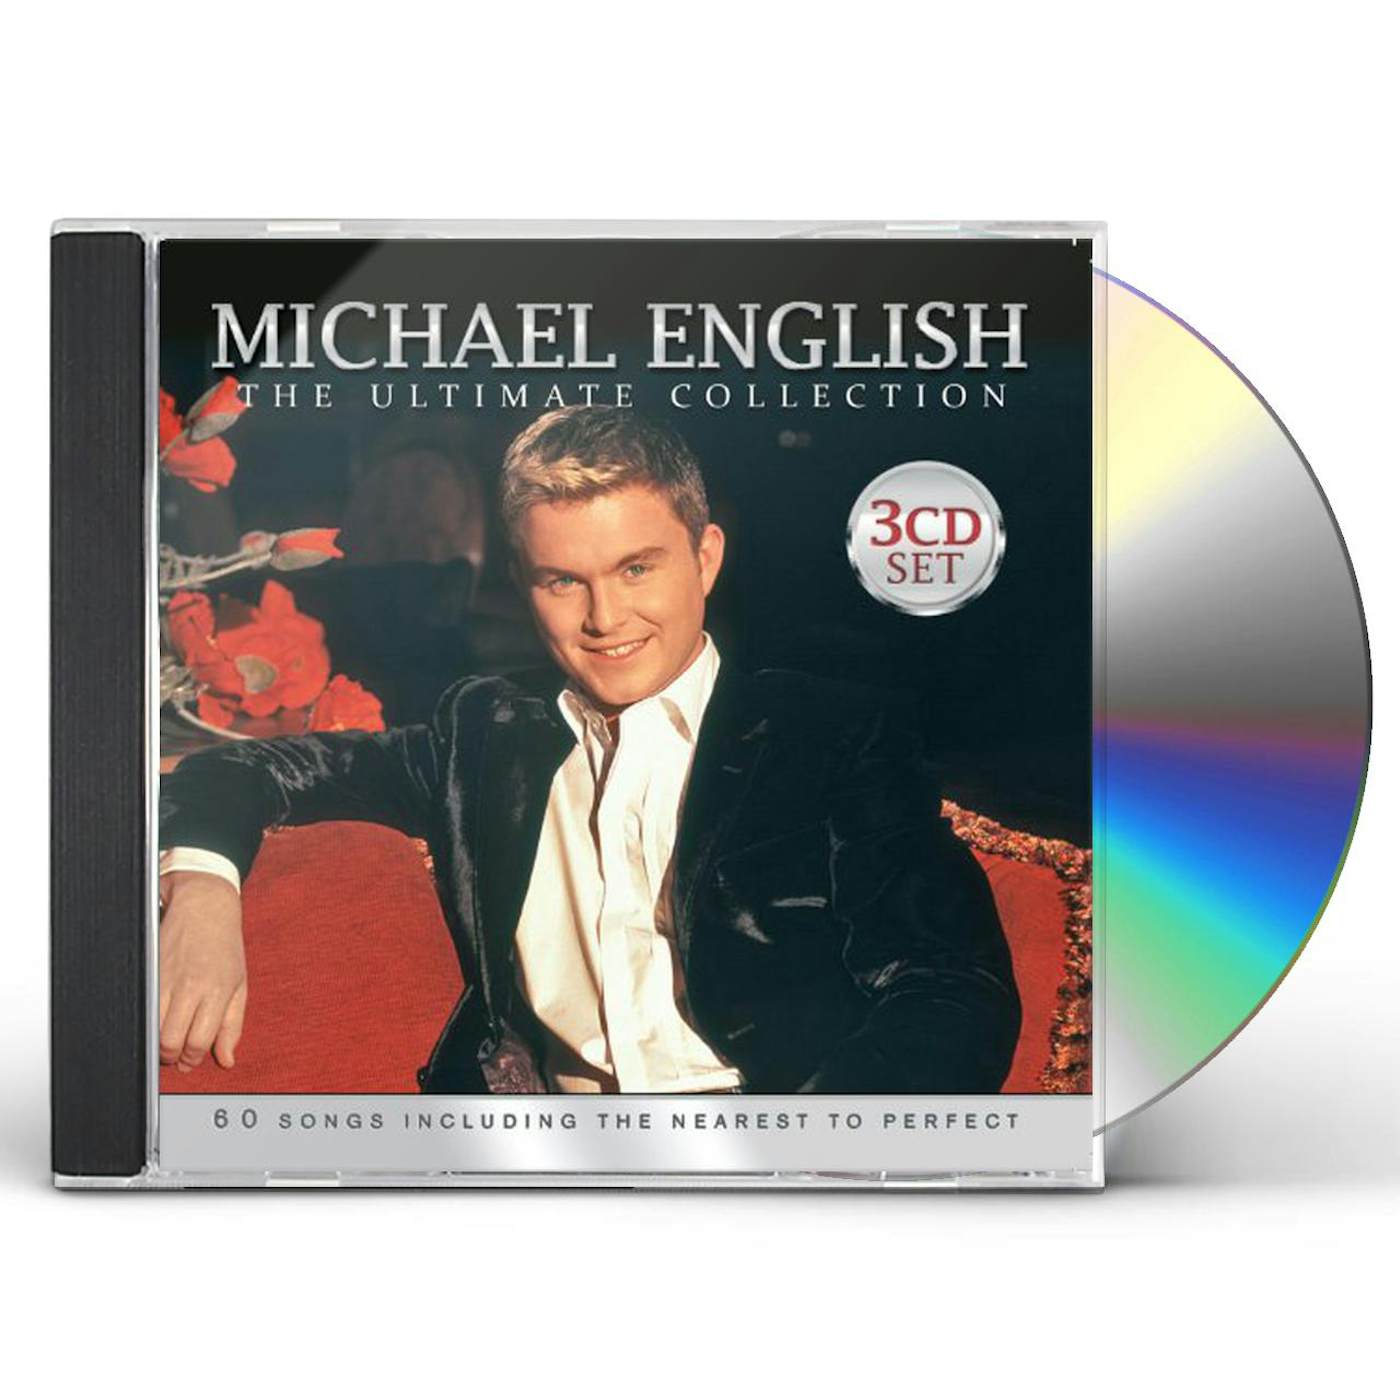 Michael English ULTIMATE COLLECTION CD